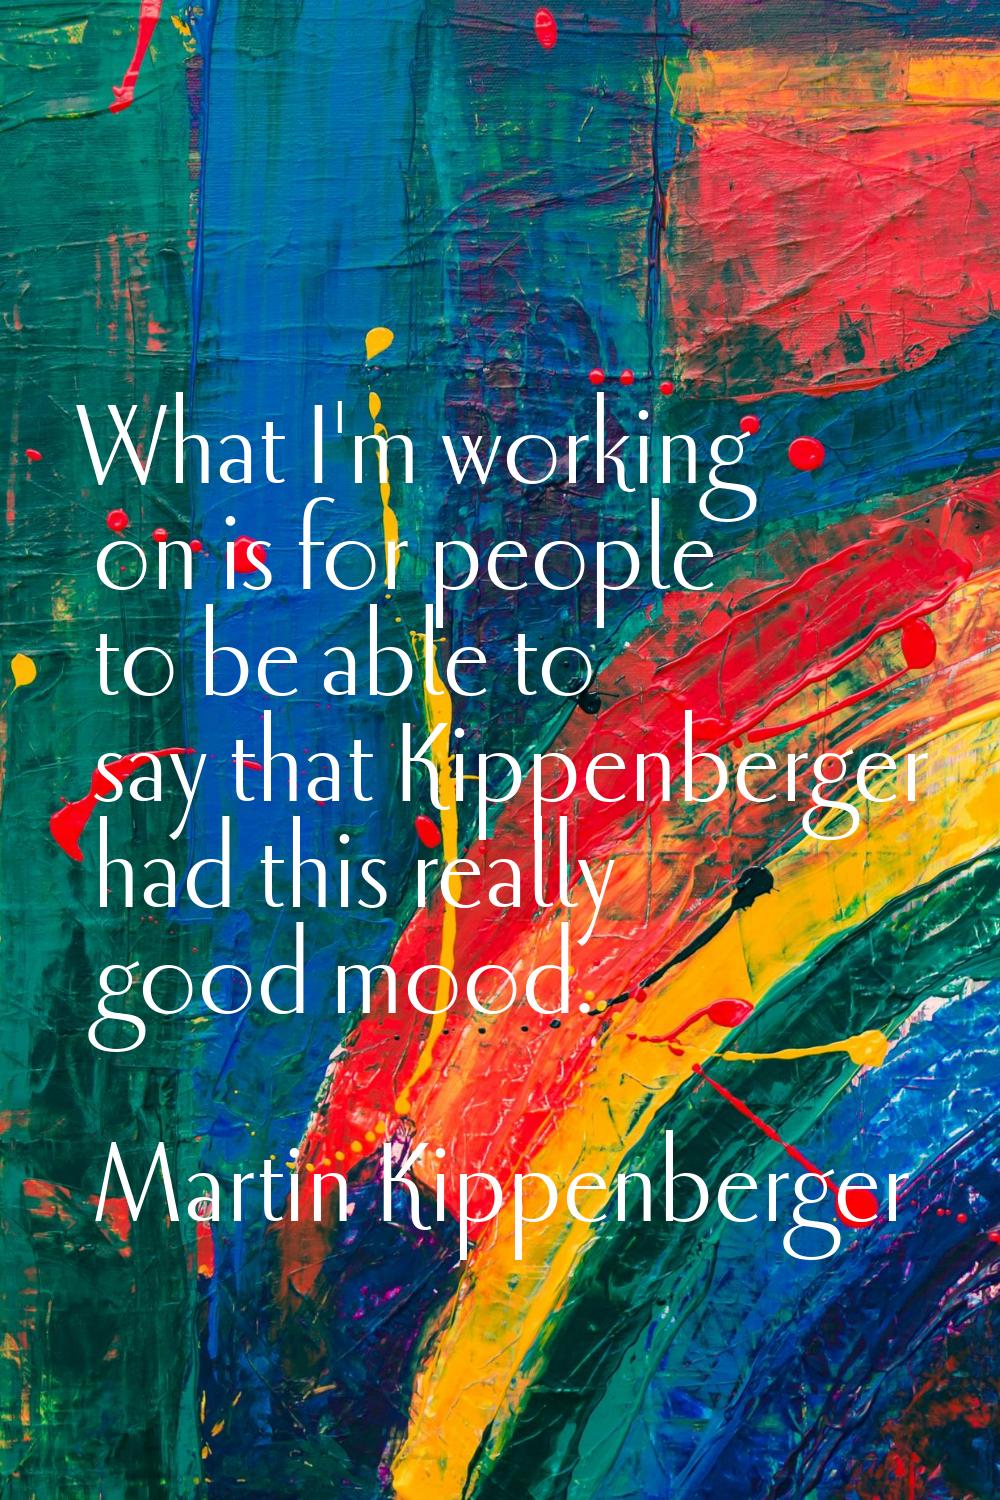 What I'm working on is for people to be able to say that Kippenberger had this really good mood.